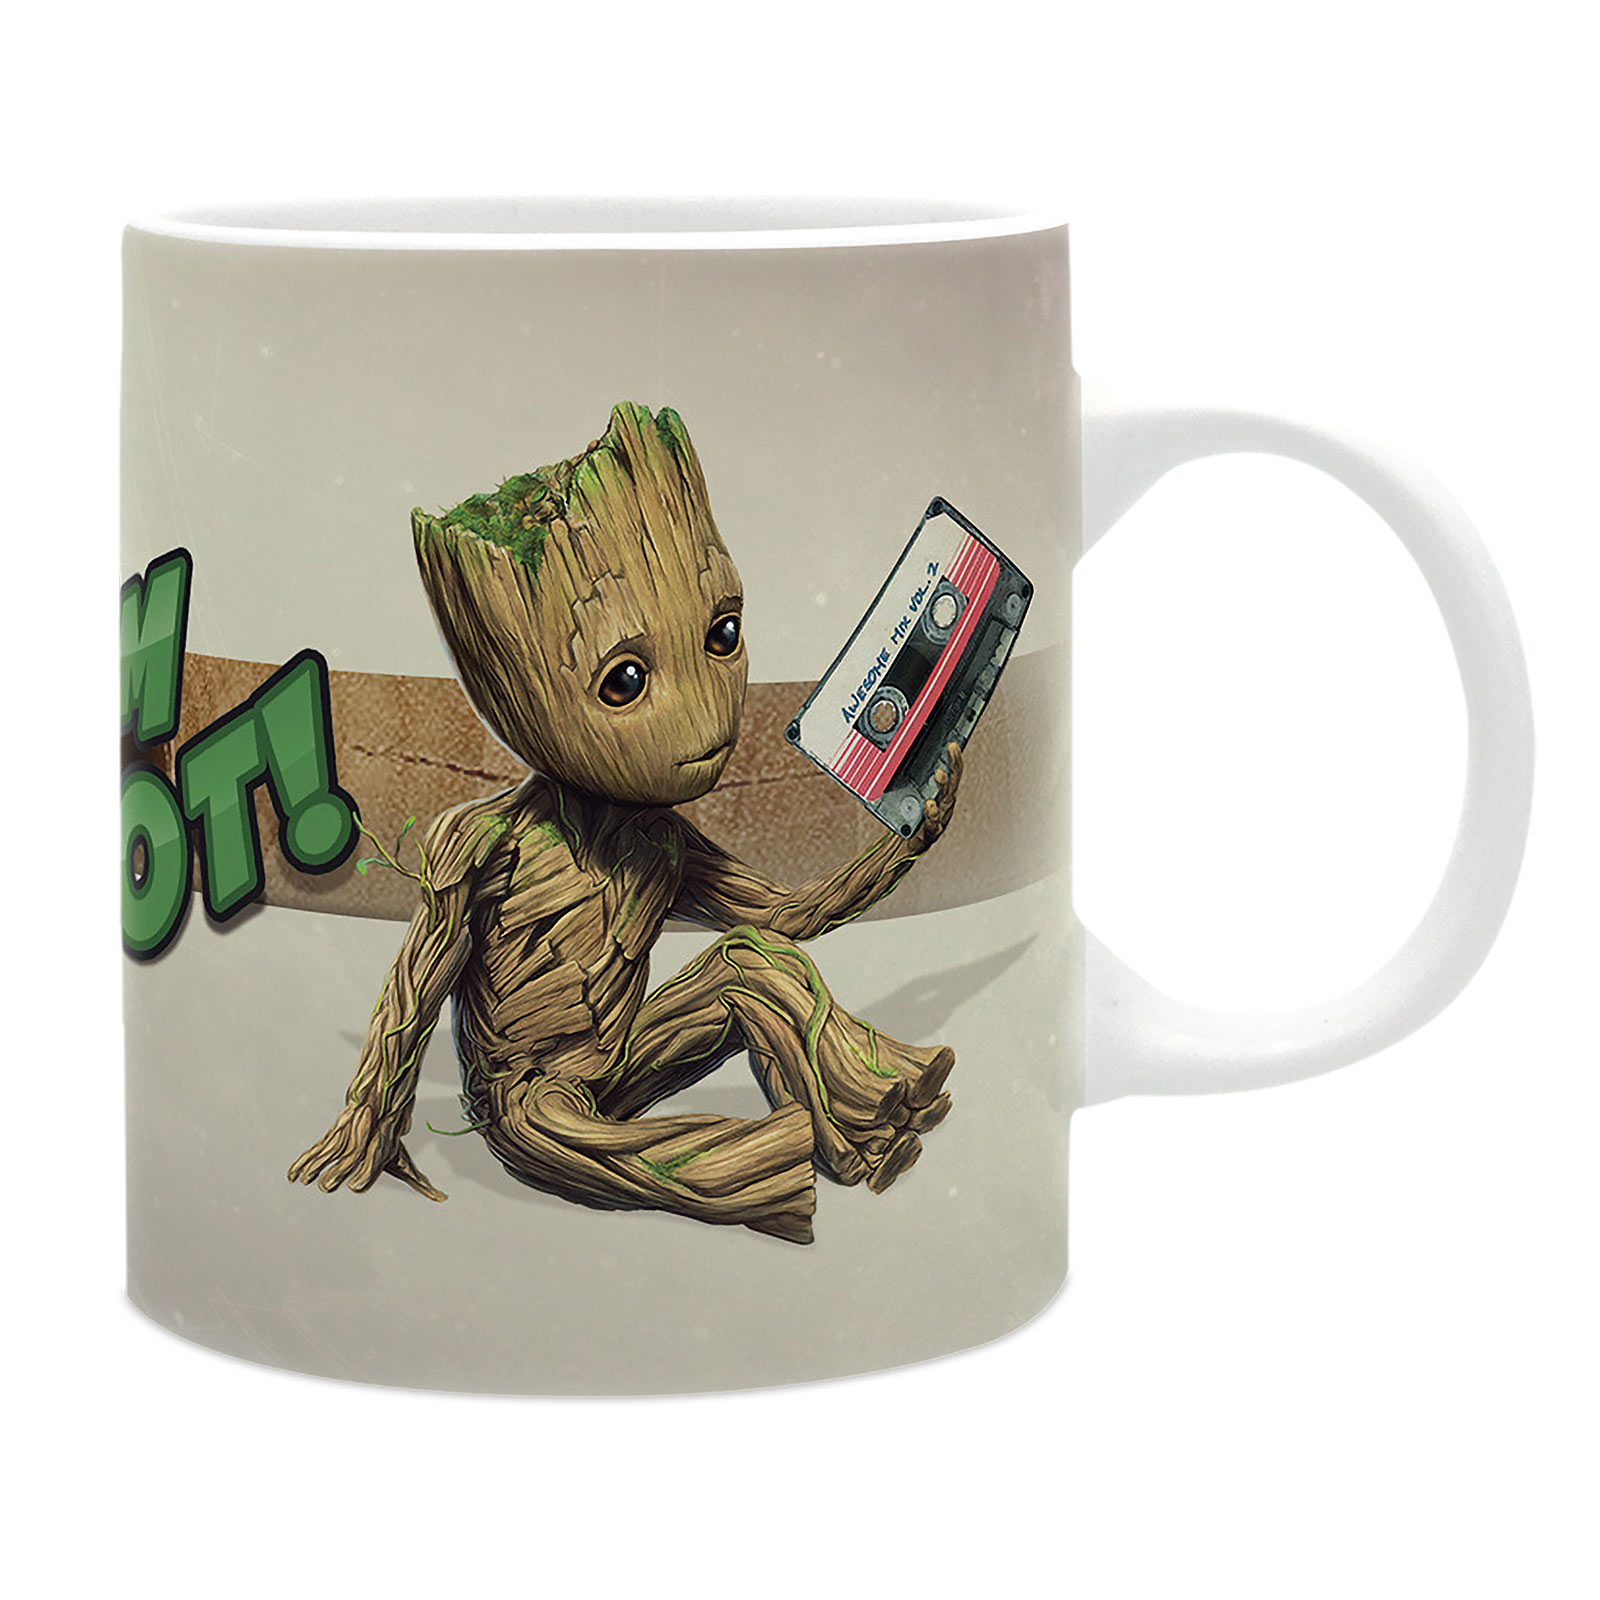 I Am Groot Tasse - Guardians of the Galaxy